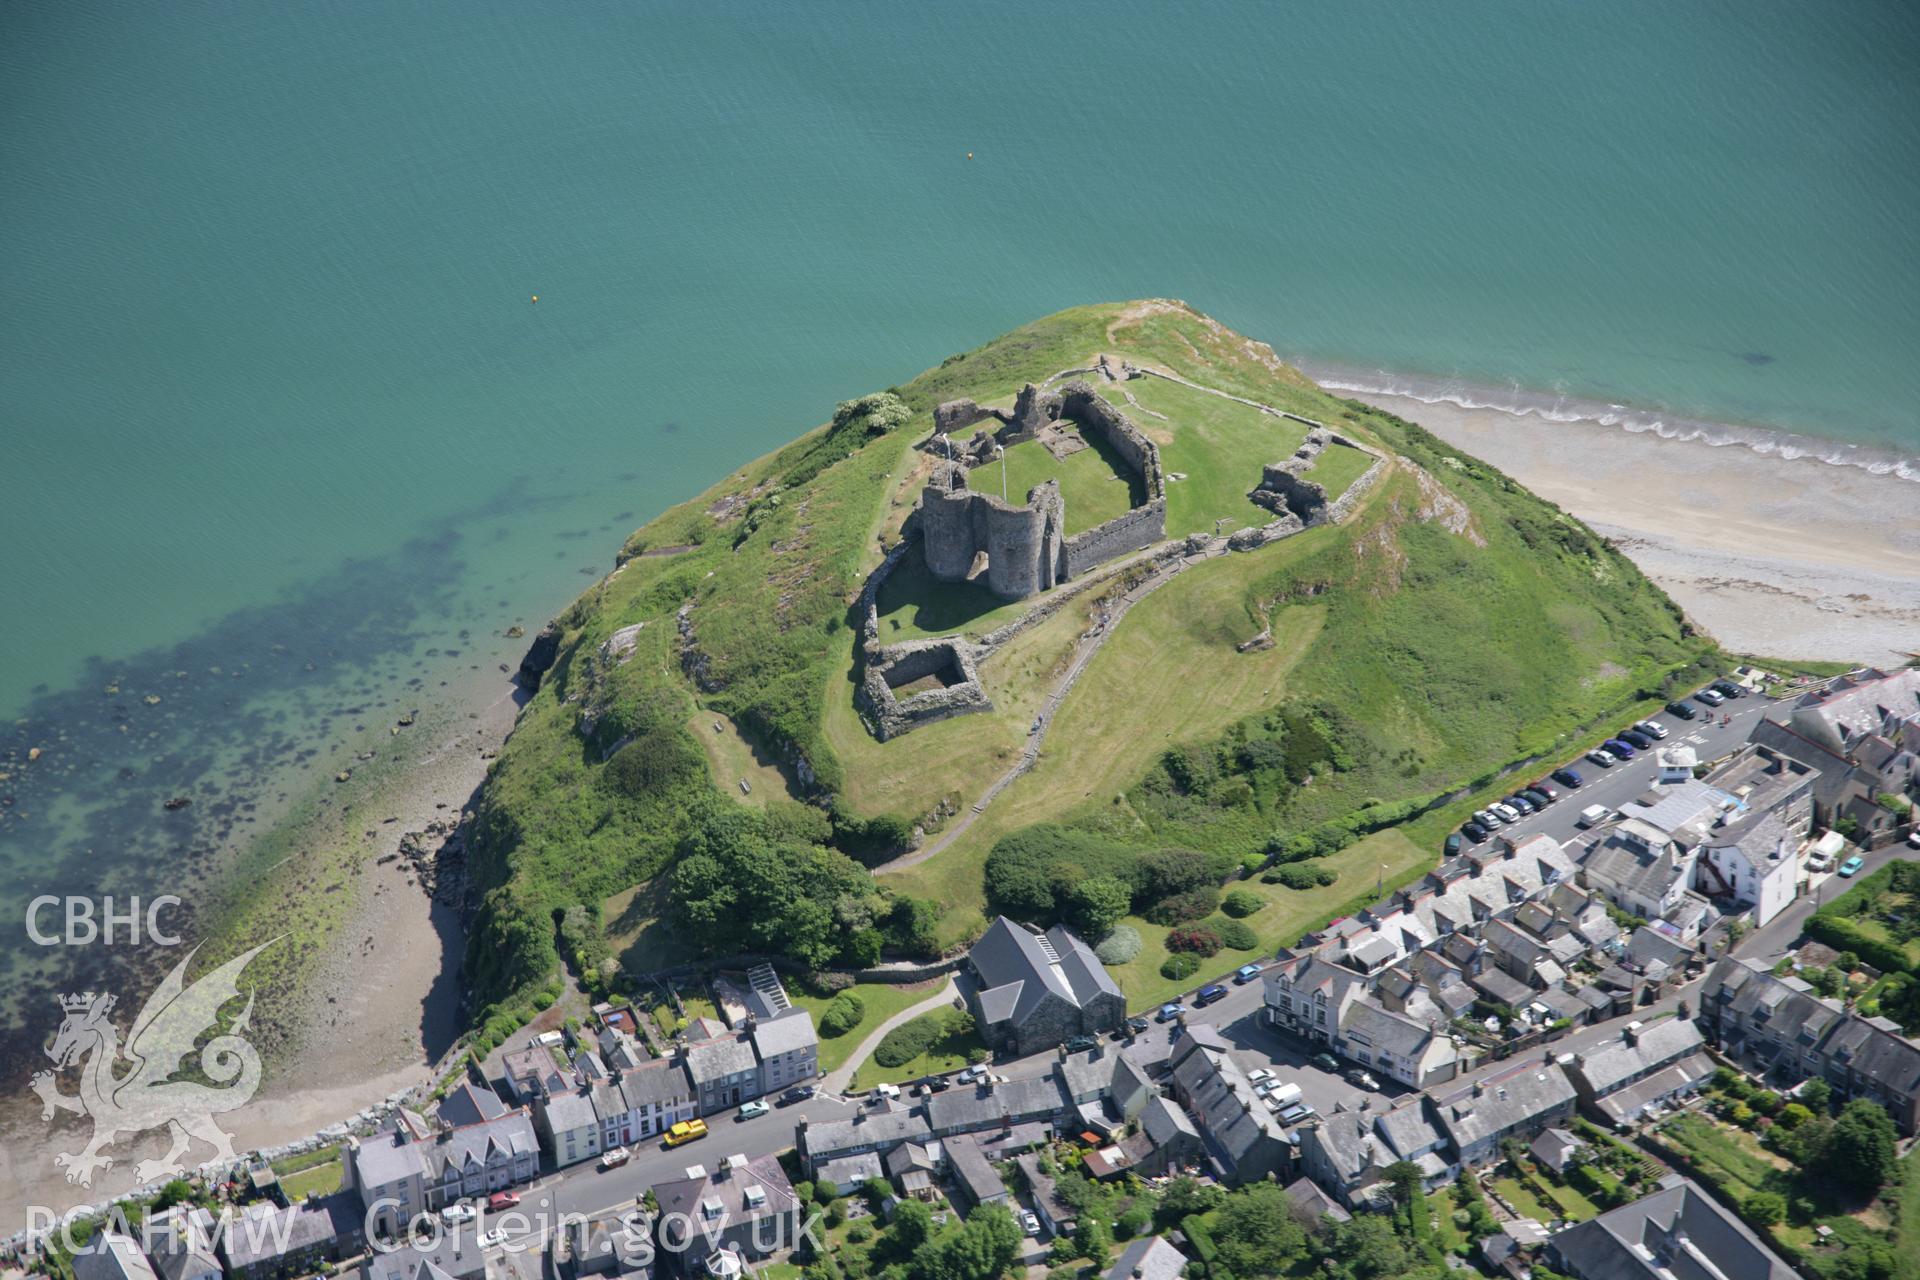 RCAHMW colour oblique aerial photograph of Criccieth Castle and the town from the north-east. Taken on 14 June 2006 by Toby Driver.